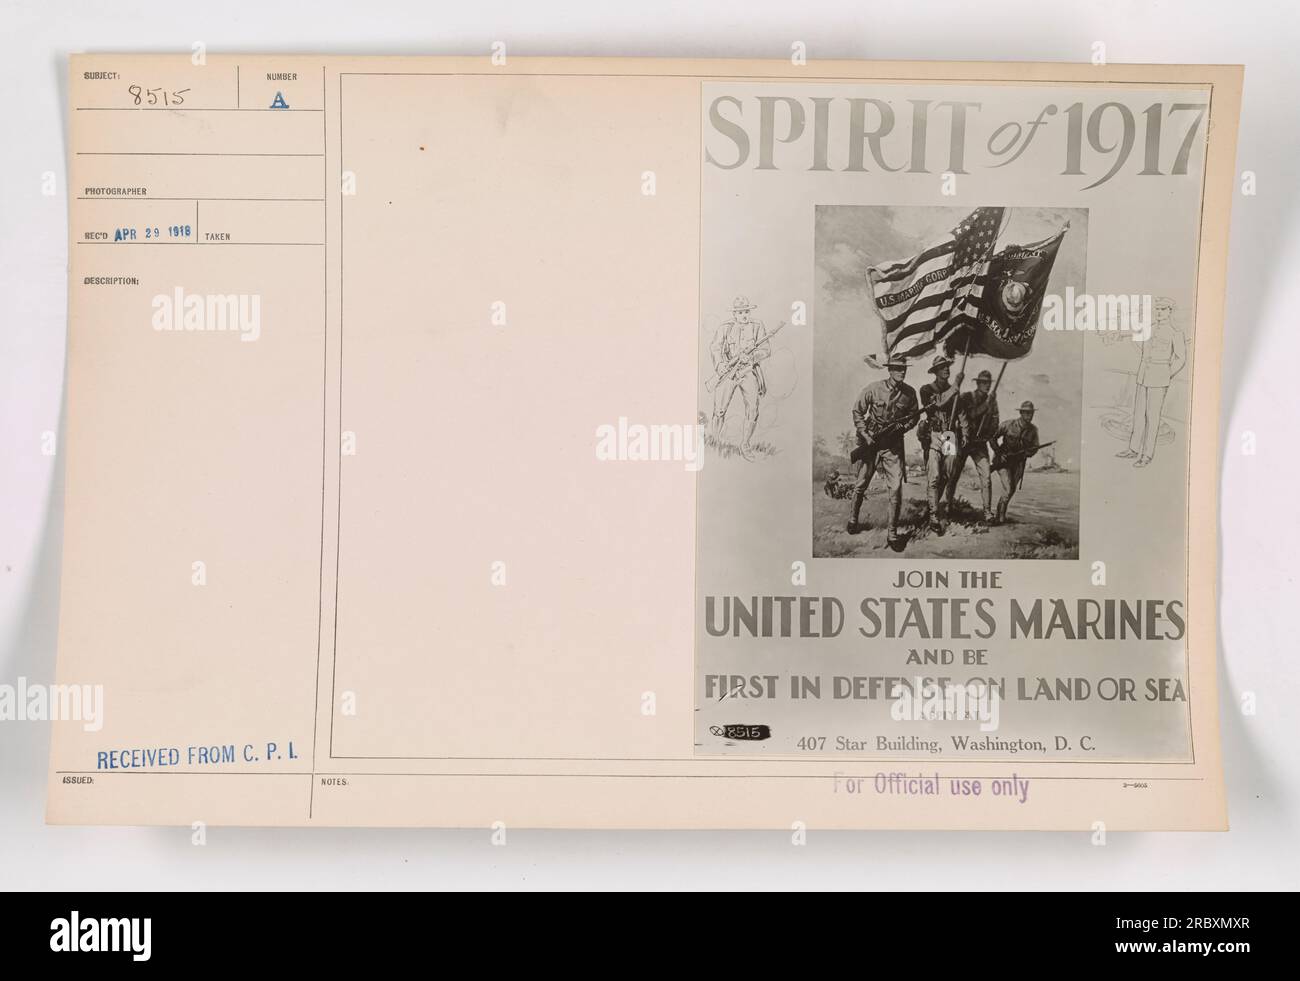 An advertisement urging people to join the United States Marines, printed on April 29, 1918 in the SPIRIT of 1917 publication. The advertisement encourages individuals to apply at 22515 407 Star Building, Washington, D. C. It emphasizes being the first line of defense on both land and sea. This image is part of the collection of American Military Activities during World War One. Stock Photo